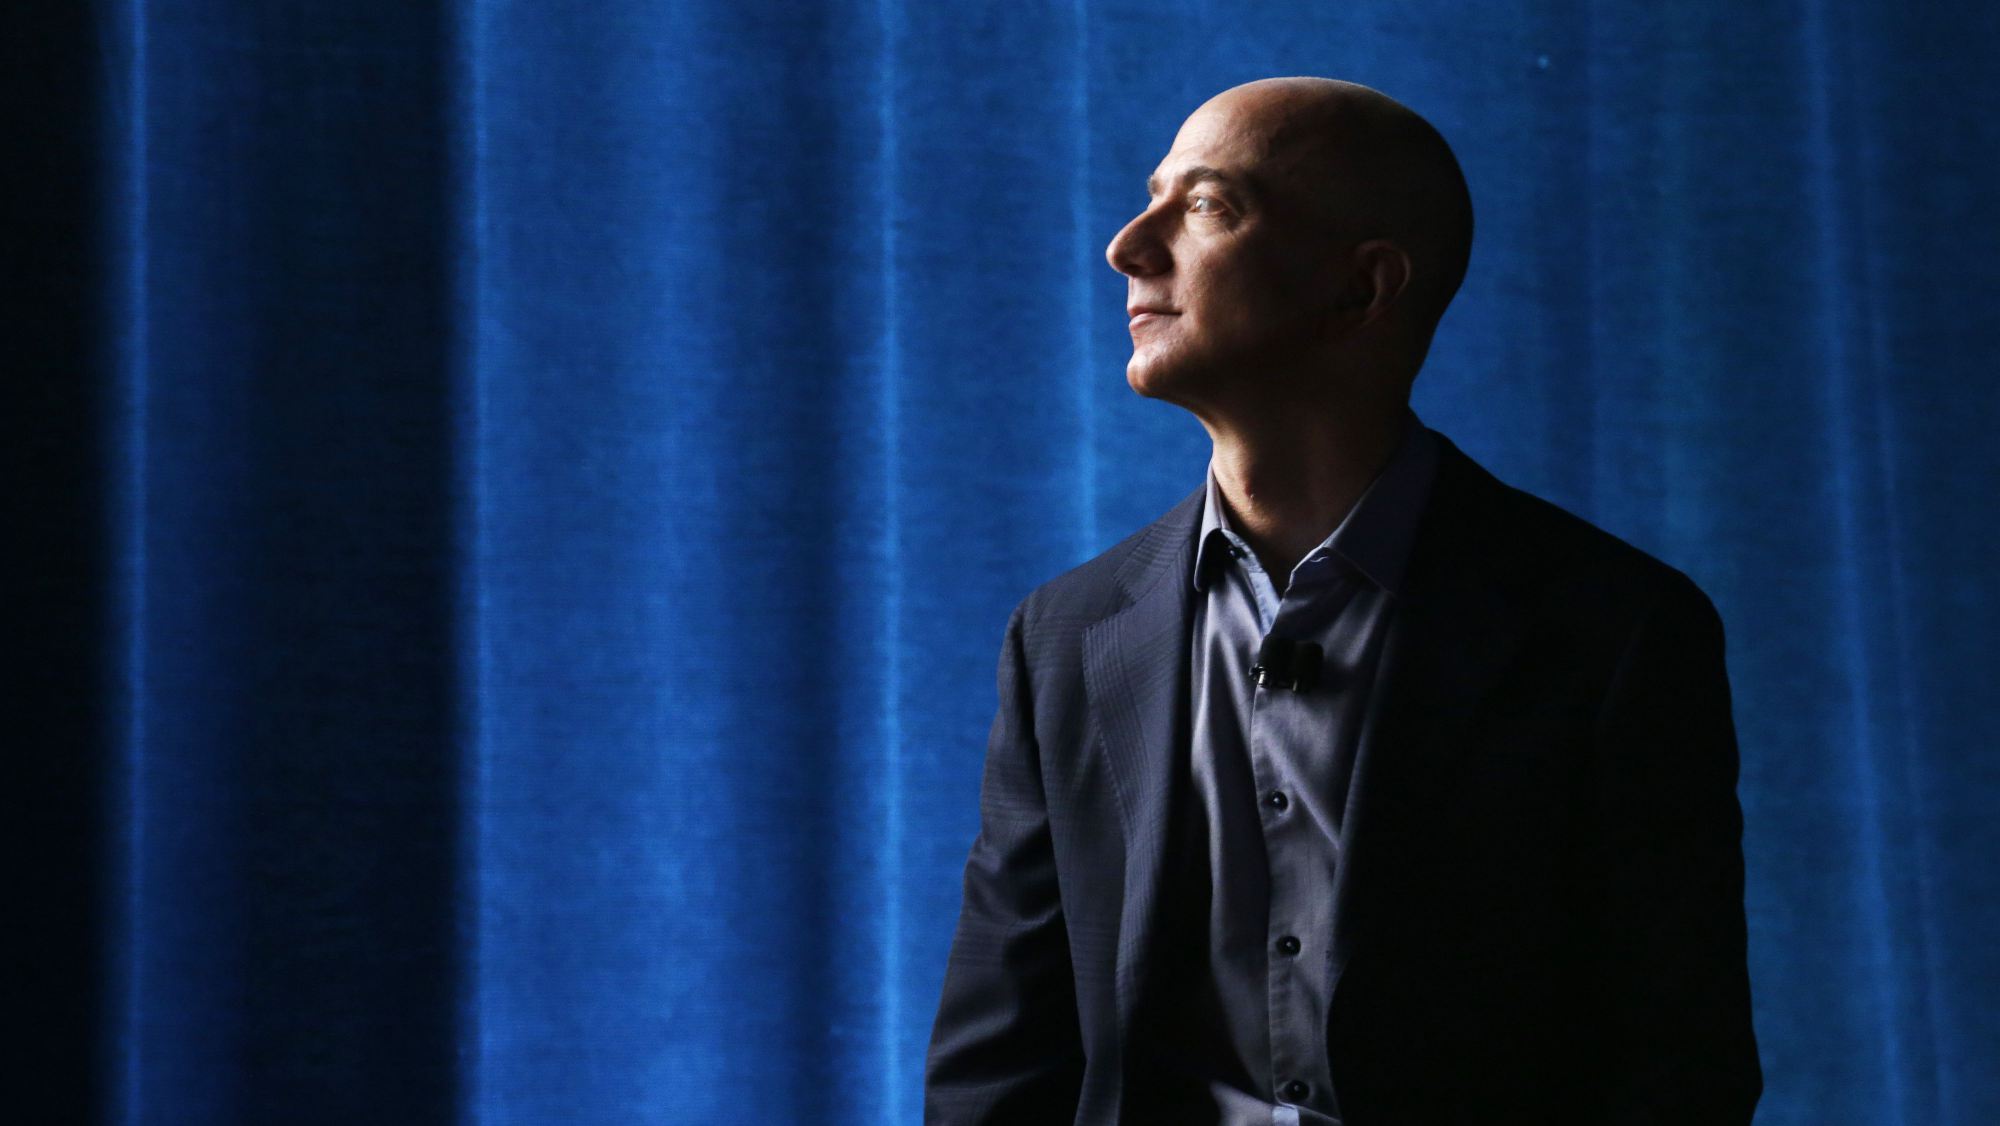 The 10 Best Performing CEOs Show What It Takes to Be a Great Manager